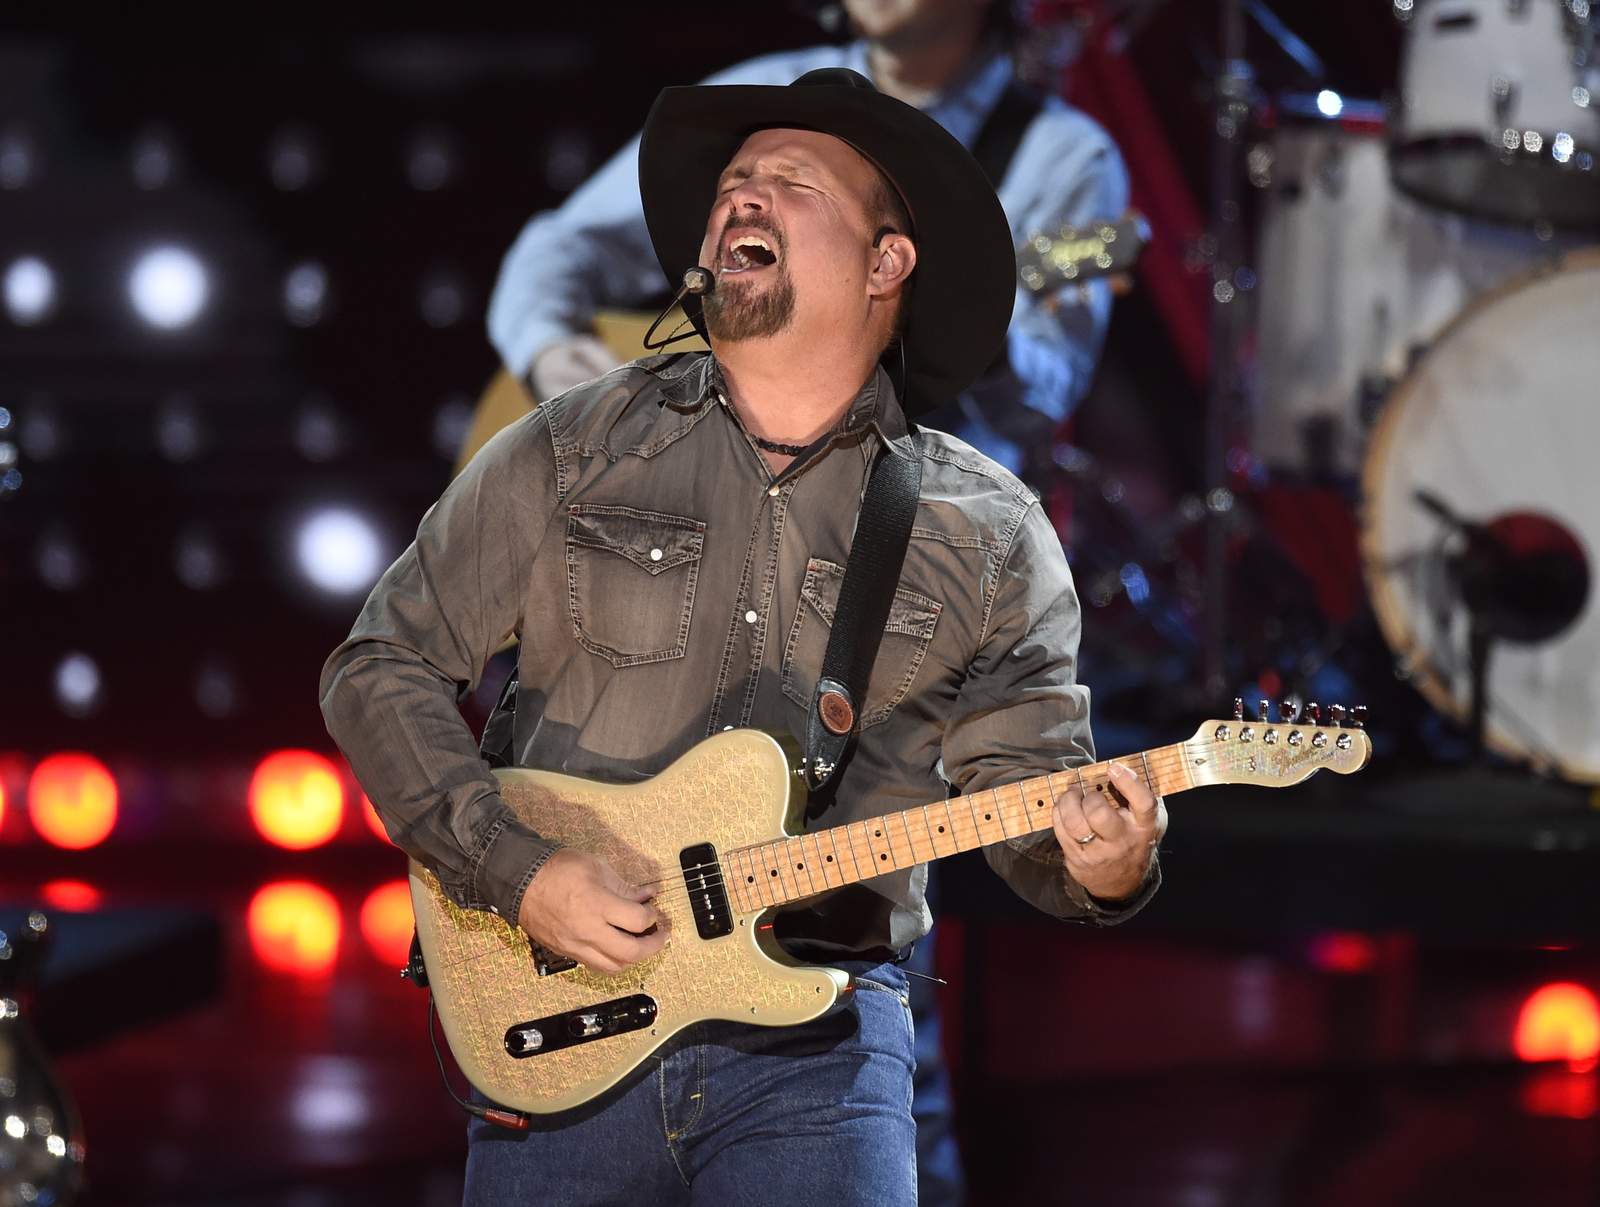 Garth Brooks concert to be played at Michigan drive-in theaters